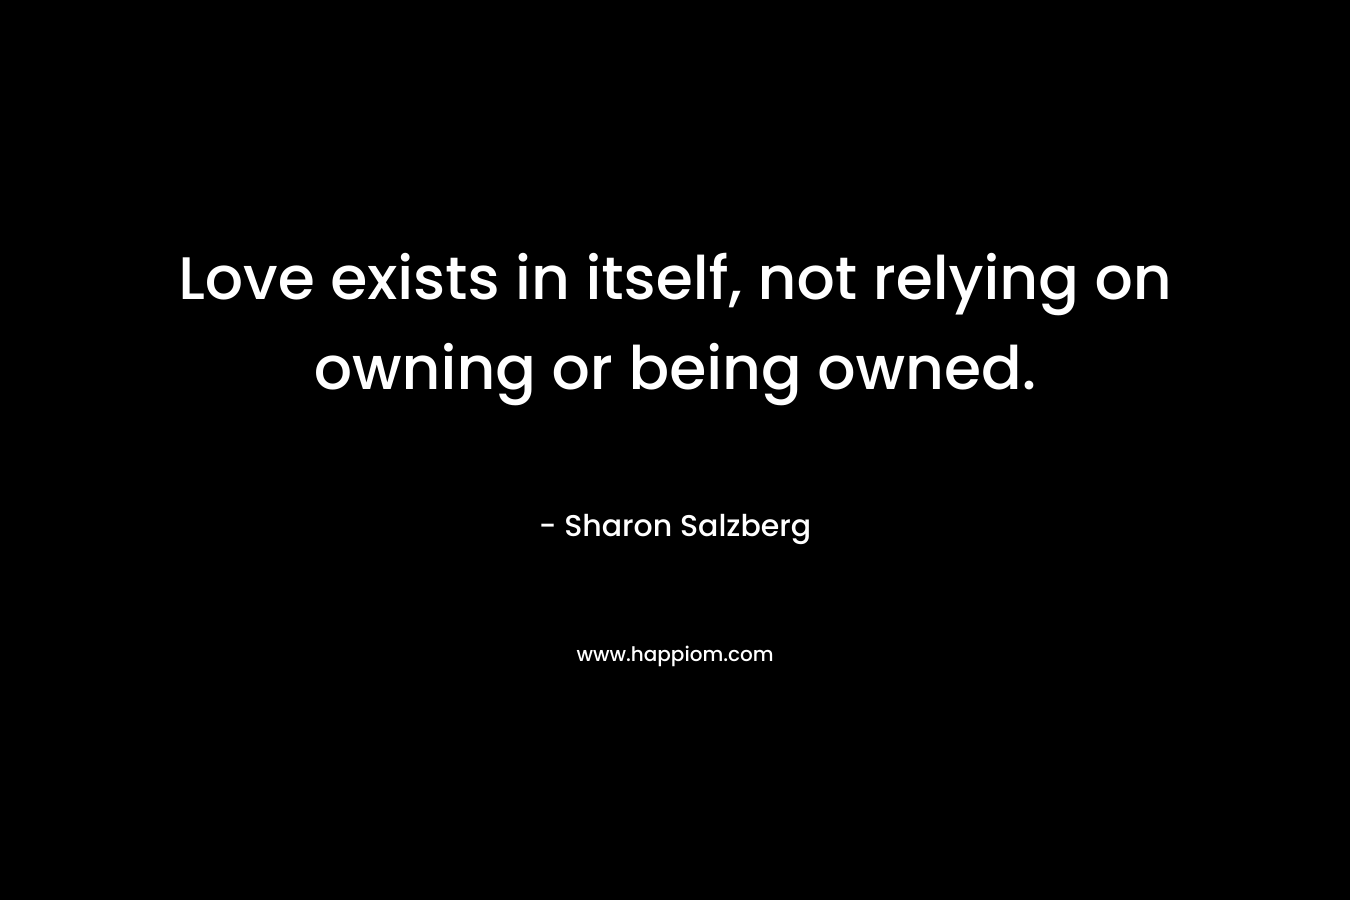 Love exists in itself, not relying on owning or being owned.